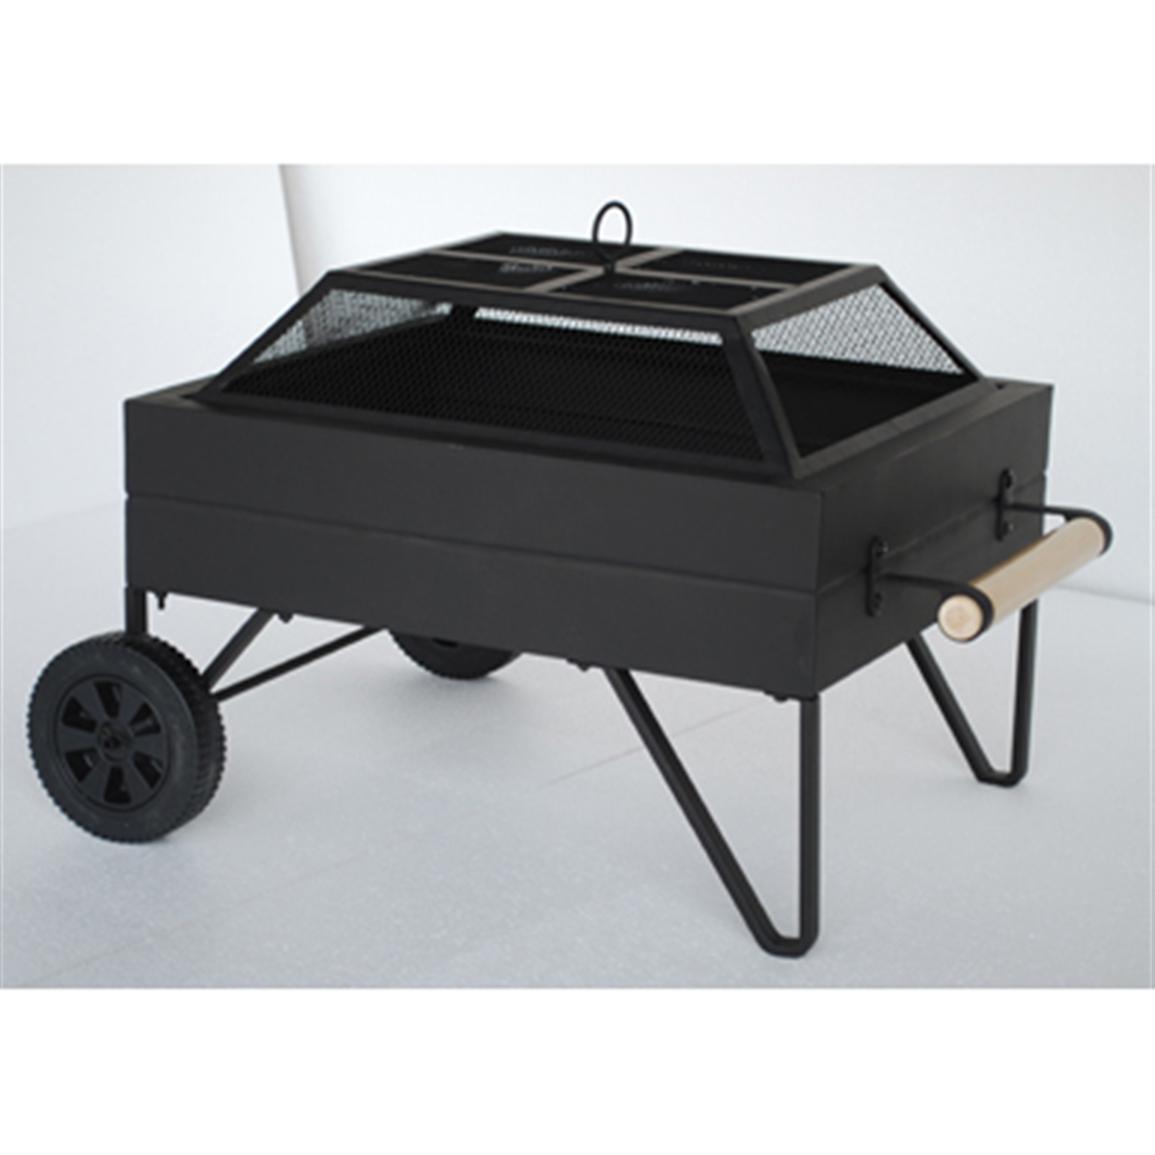 Steel Fire Pit on Wheels - 190615, Fire Pits & Patio Heaters at Sportsman's  Guide